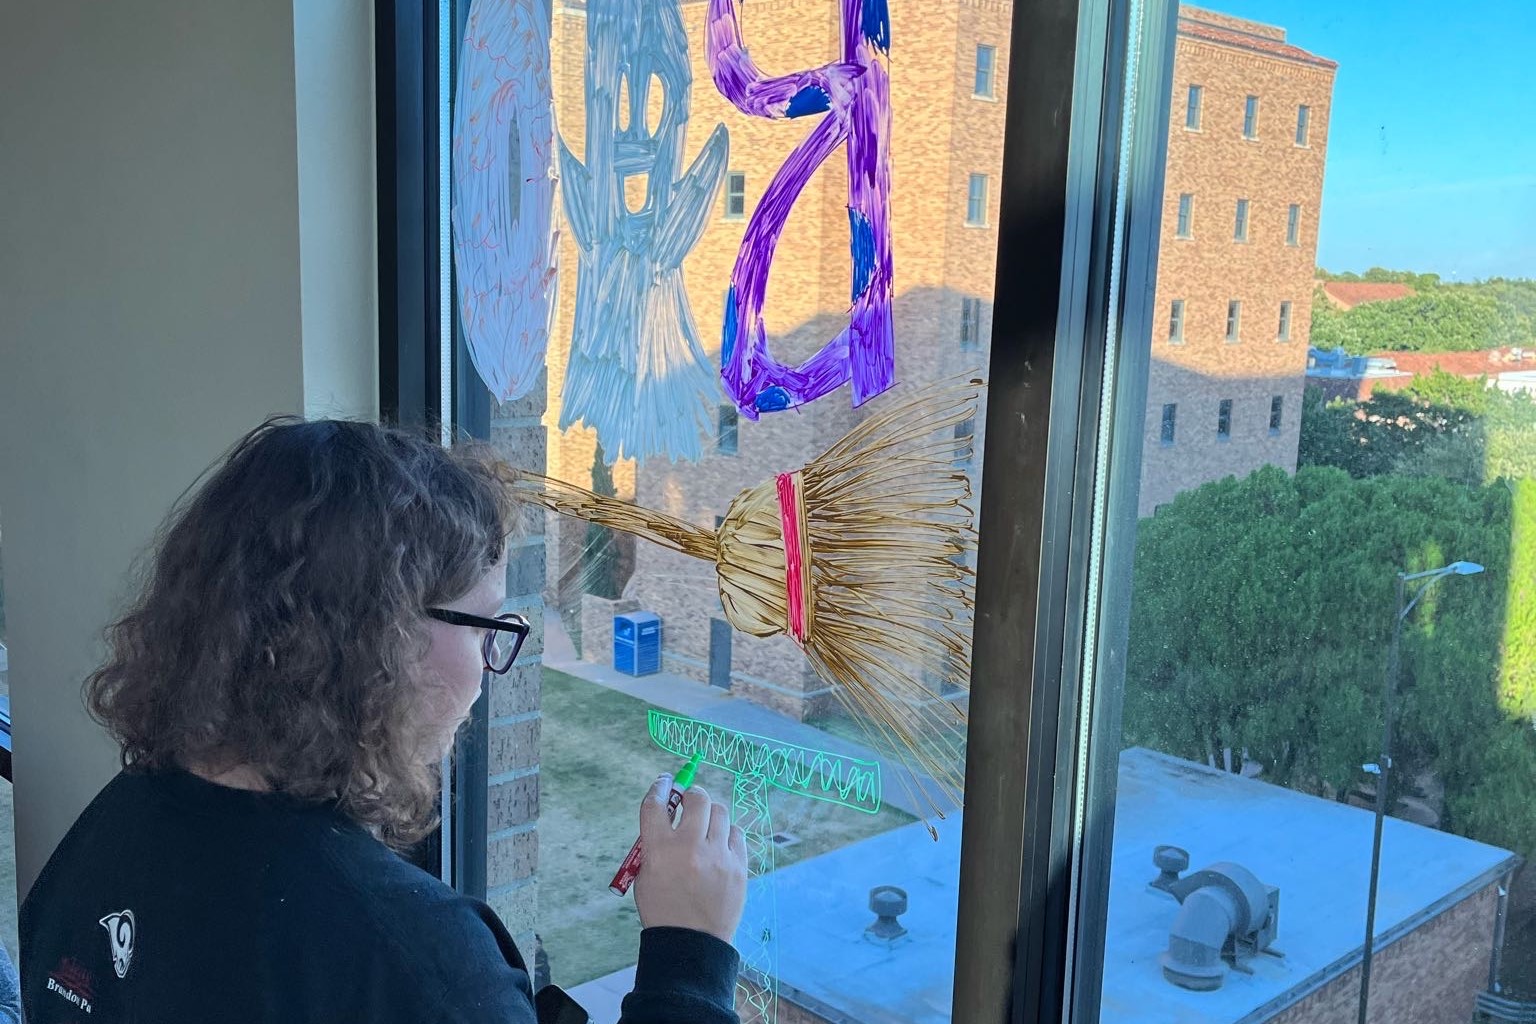 An honors student is decorating the Honors Lounge widows displaying a 'Boo' with a ghost as the middle 'O', a broom, and is working on the letter 'T'. Through the window, you can see part of Killingsworth Hall and the treetops around campus.